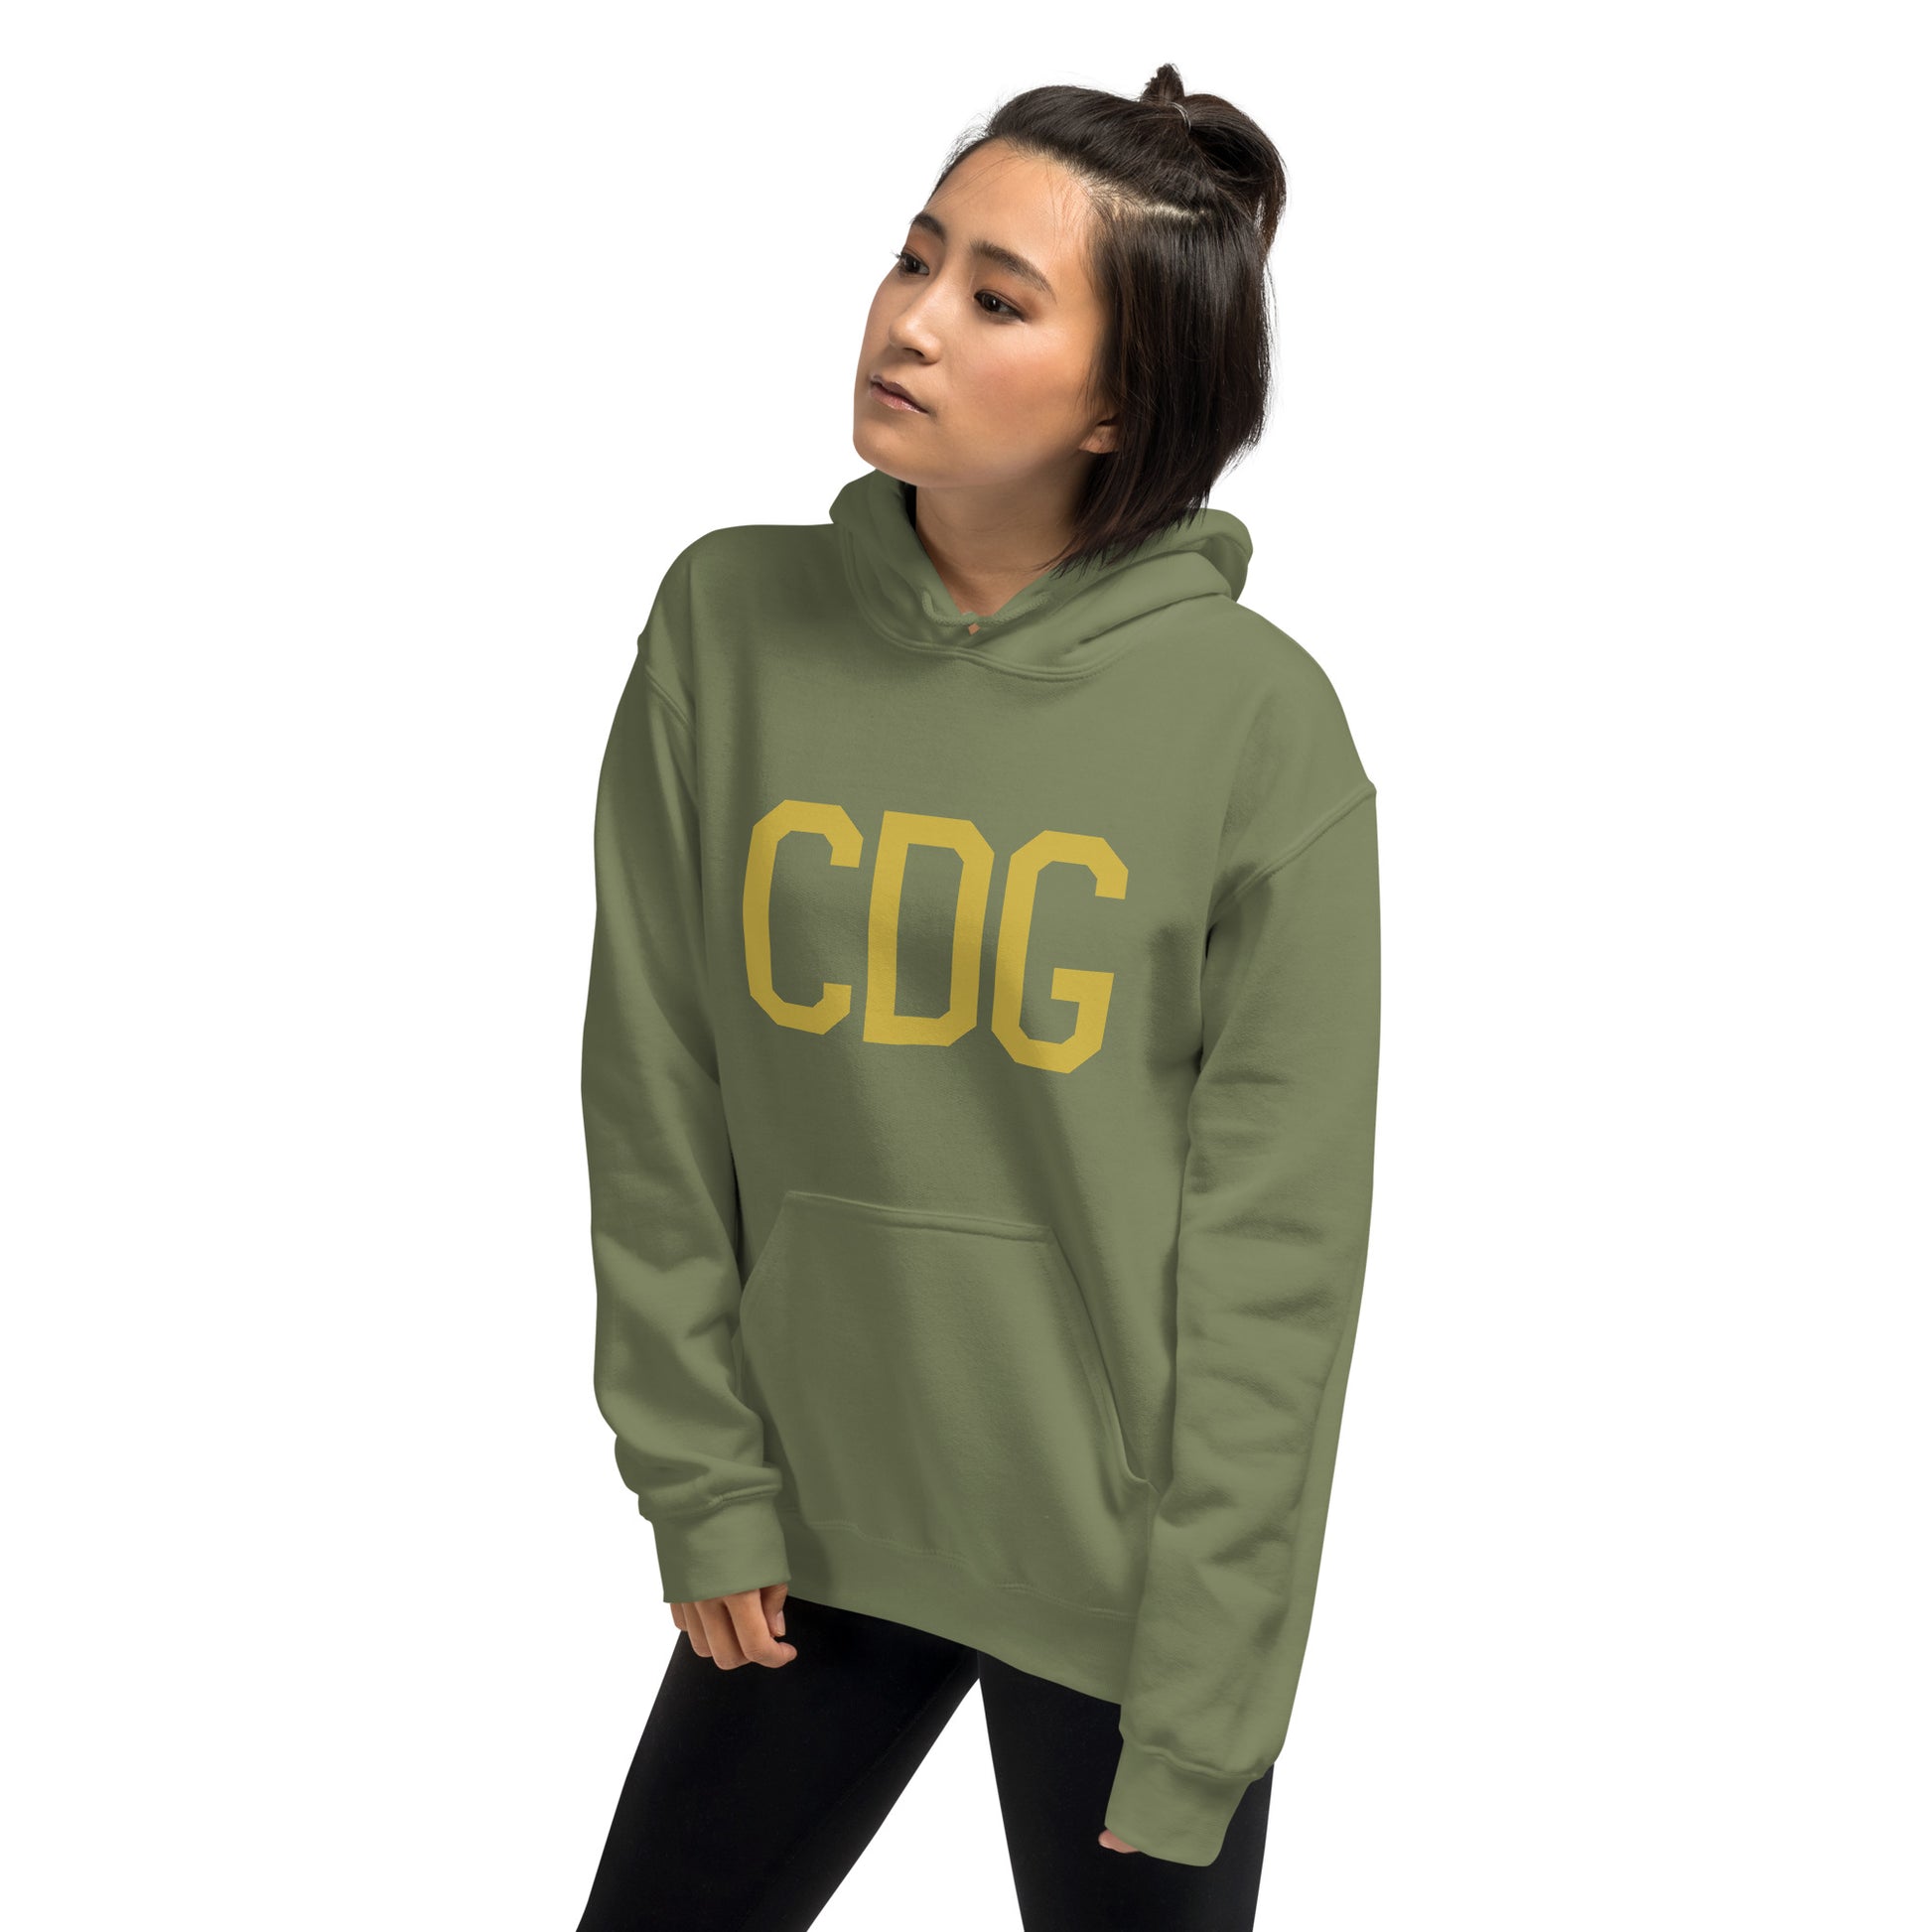 Aviation Gift Unisex Hoodie - Old Gold Graphic • CDG Paris • YHM Designs - Image 10